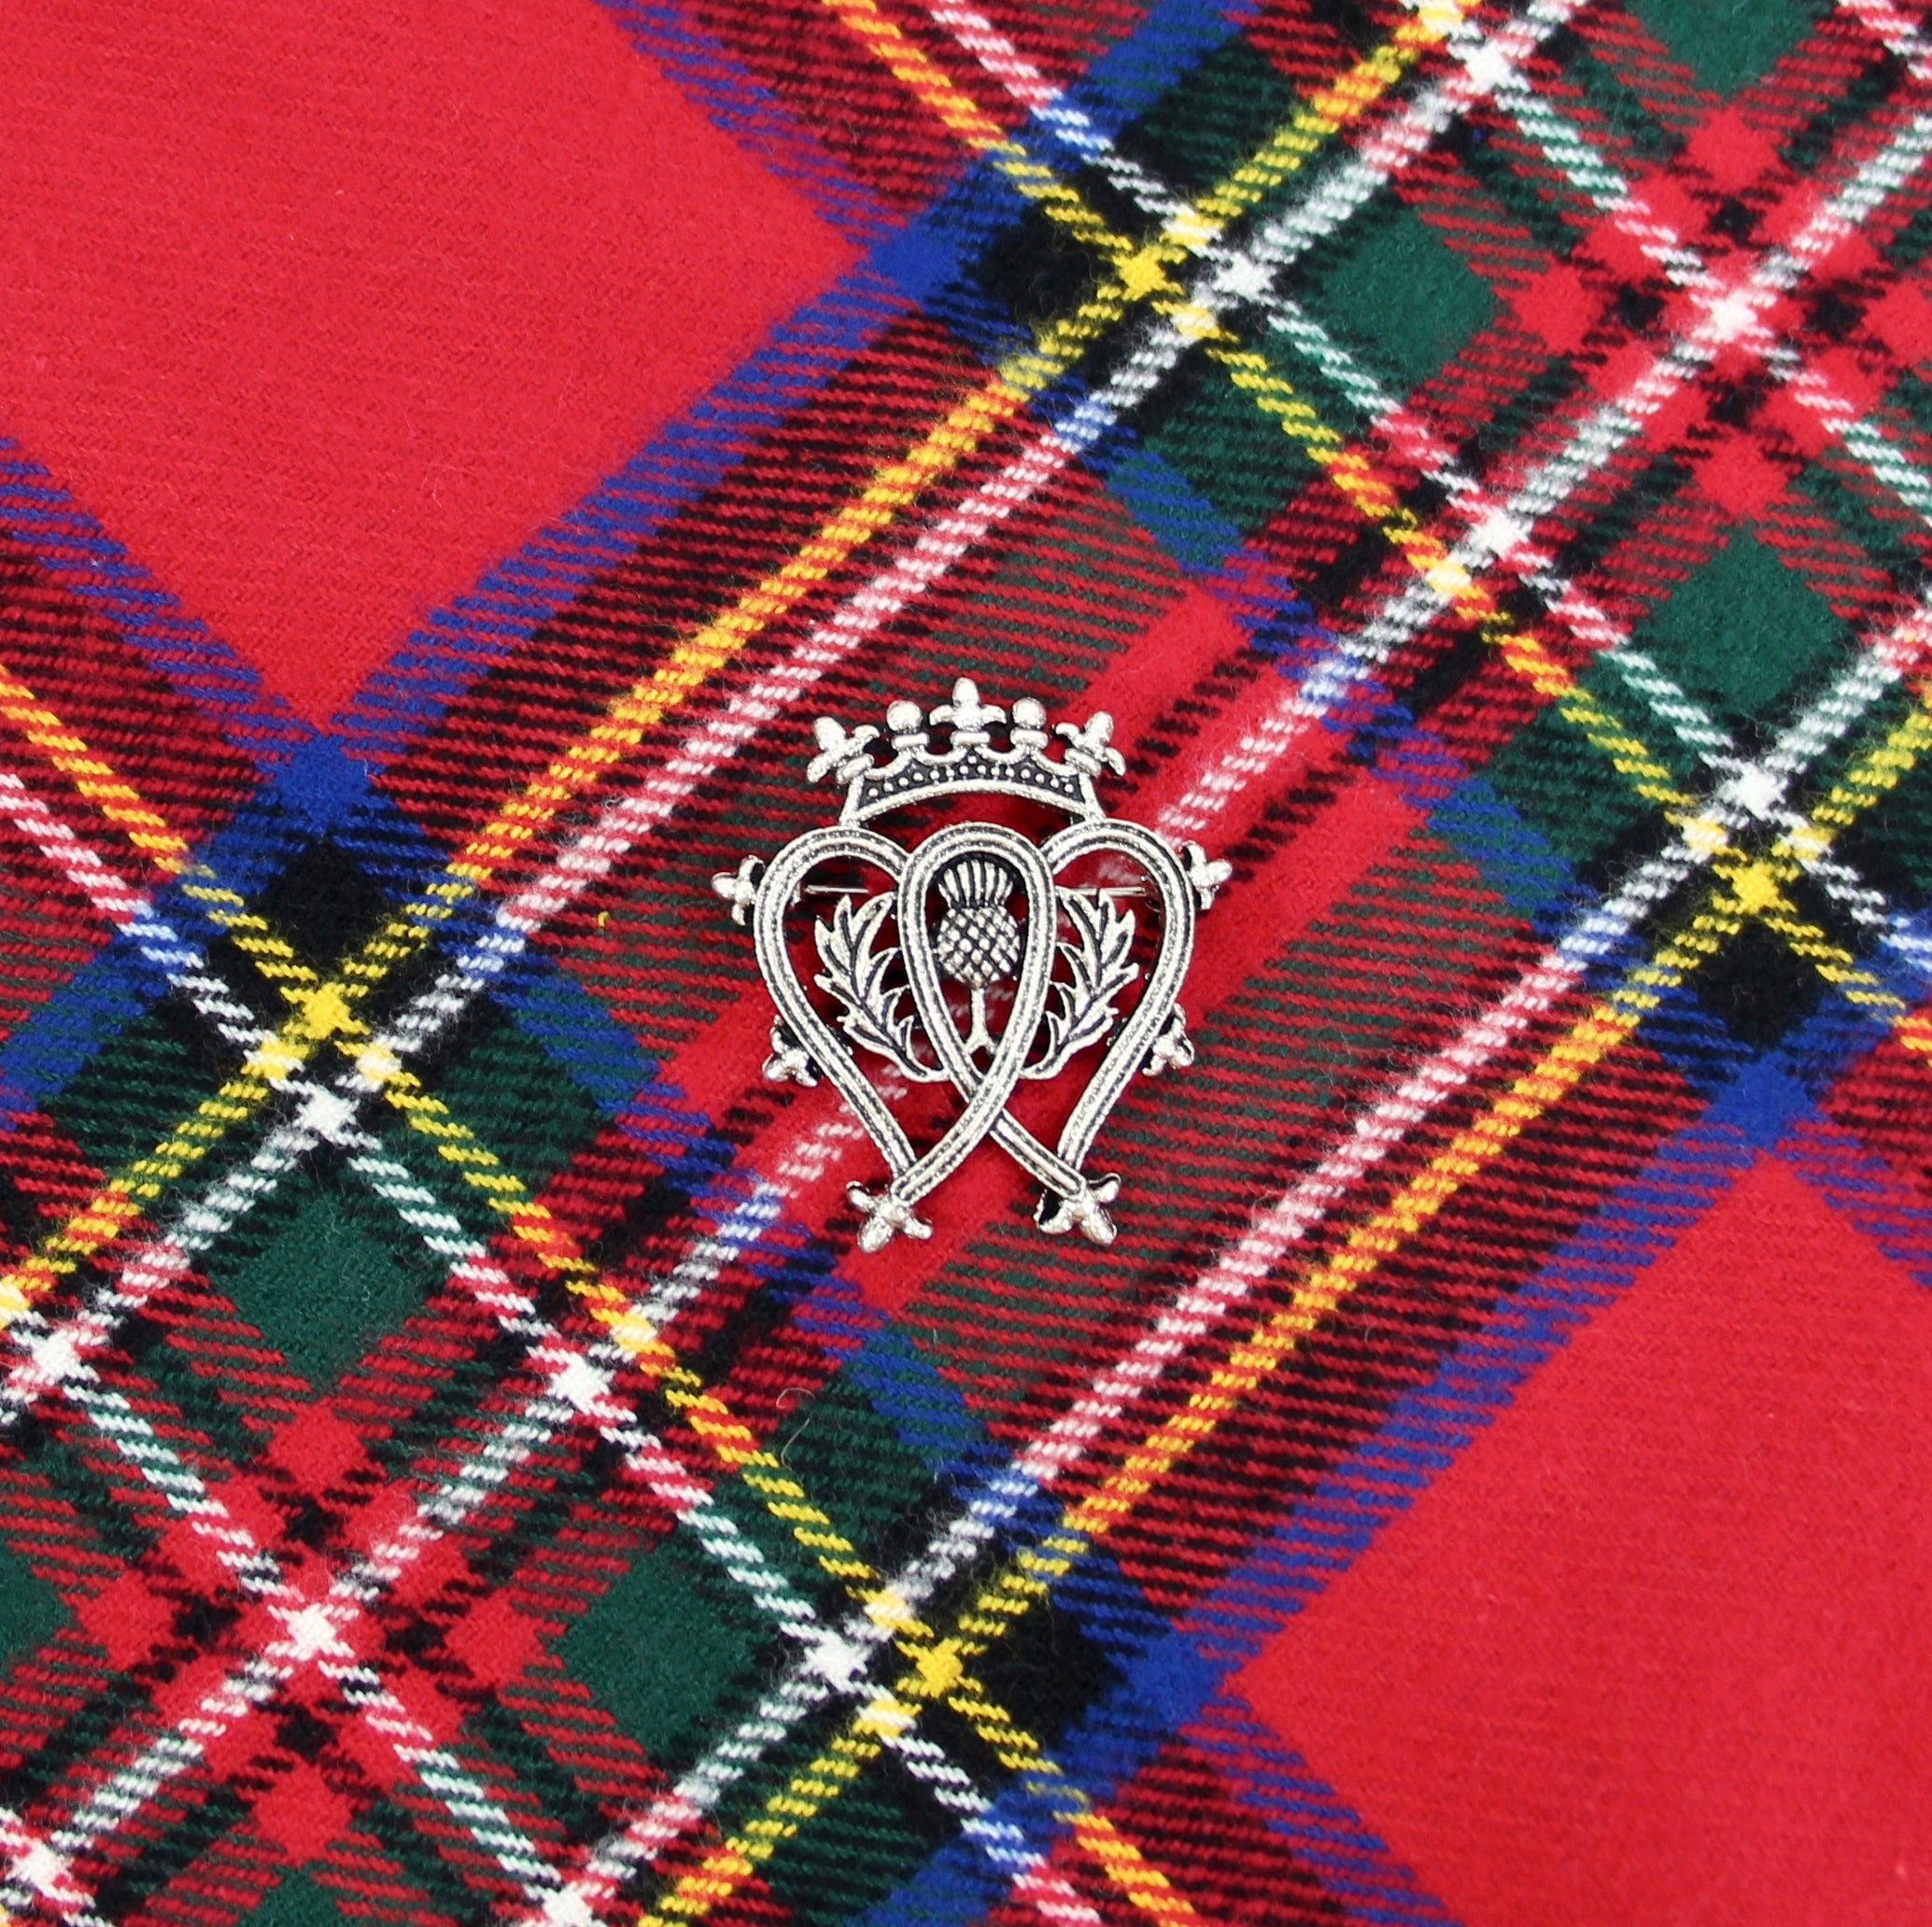 Luckenbooth Scottish Heart Shaped Brooch with Scottish Thistle and Crown